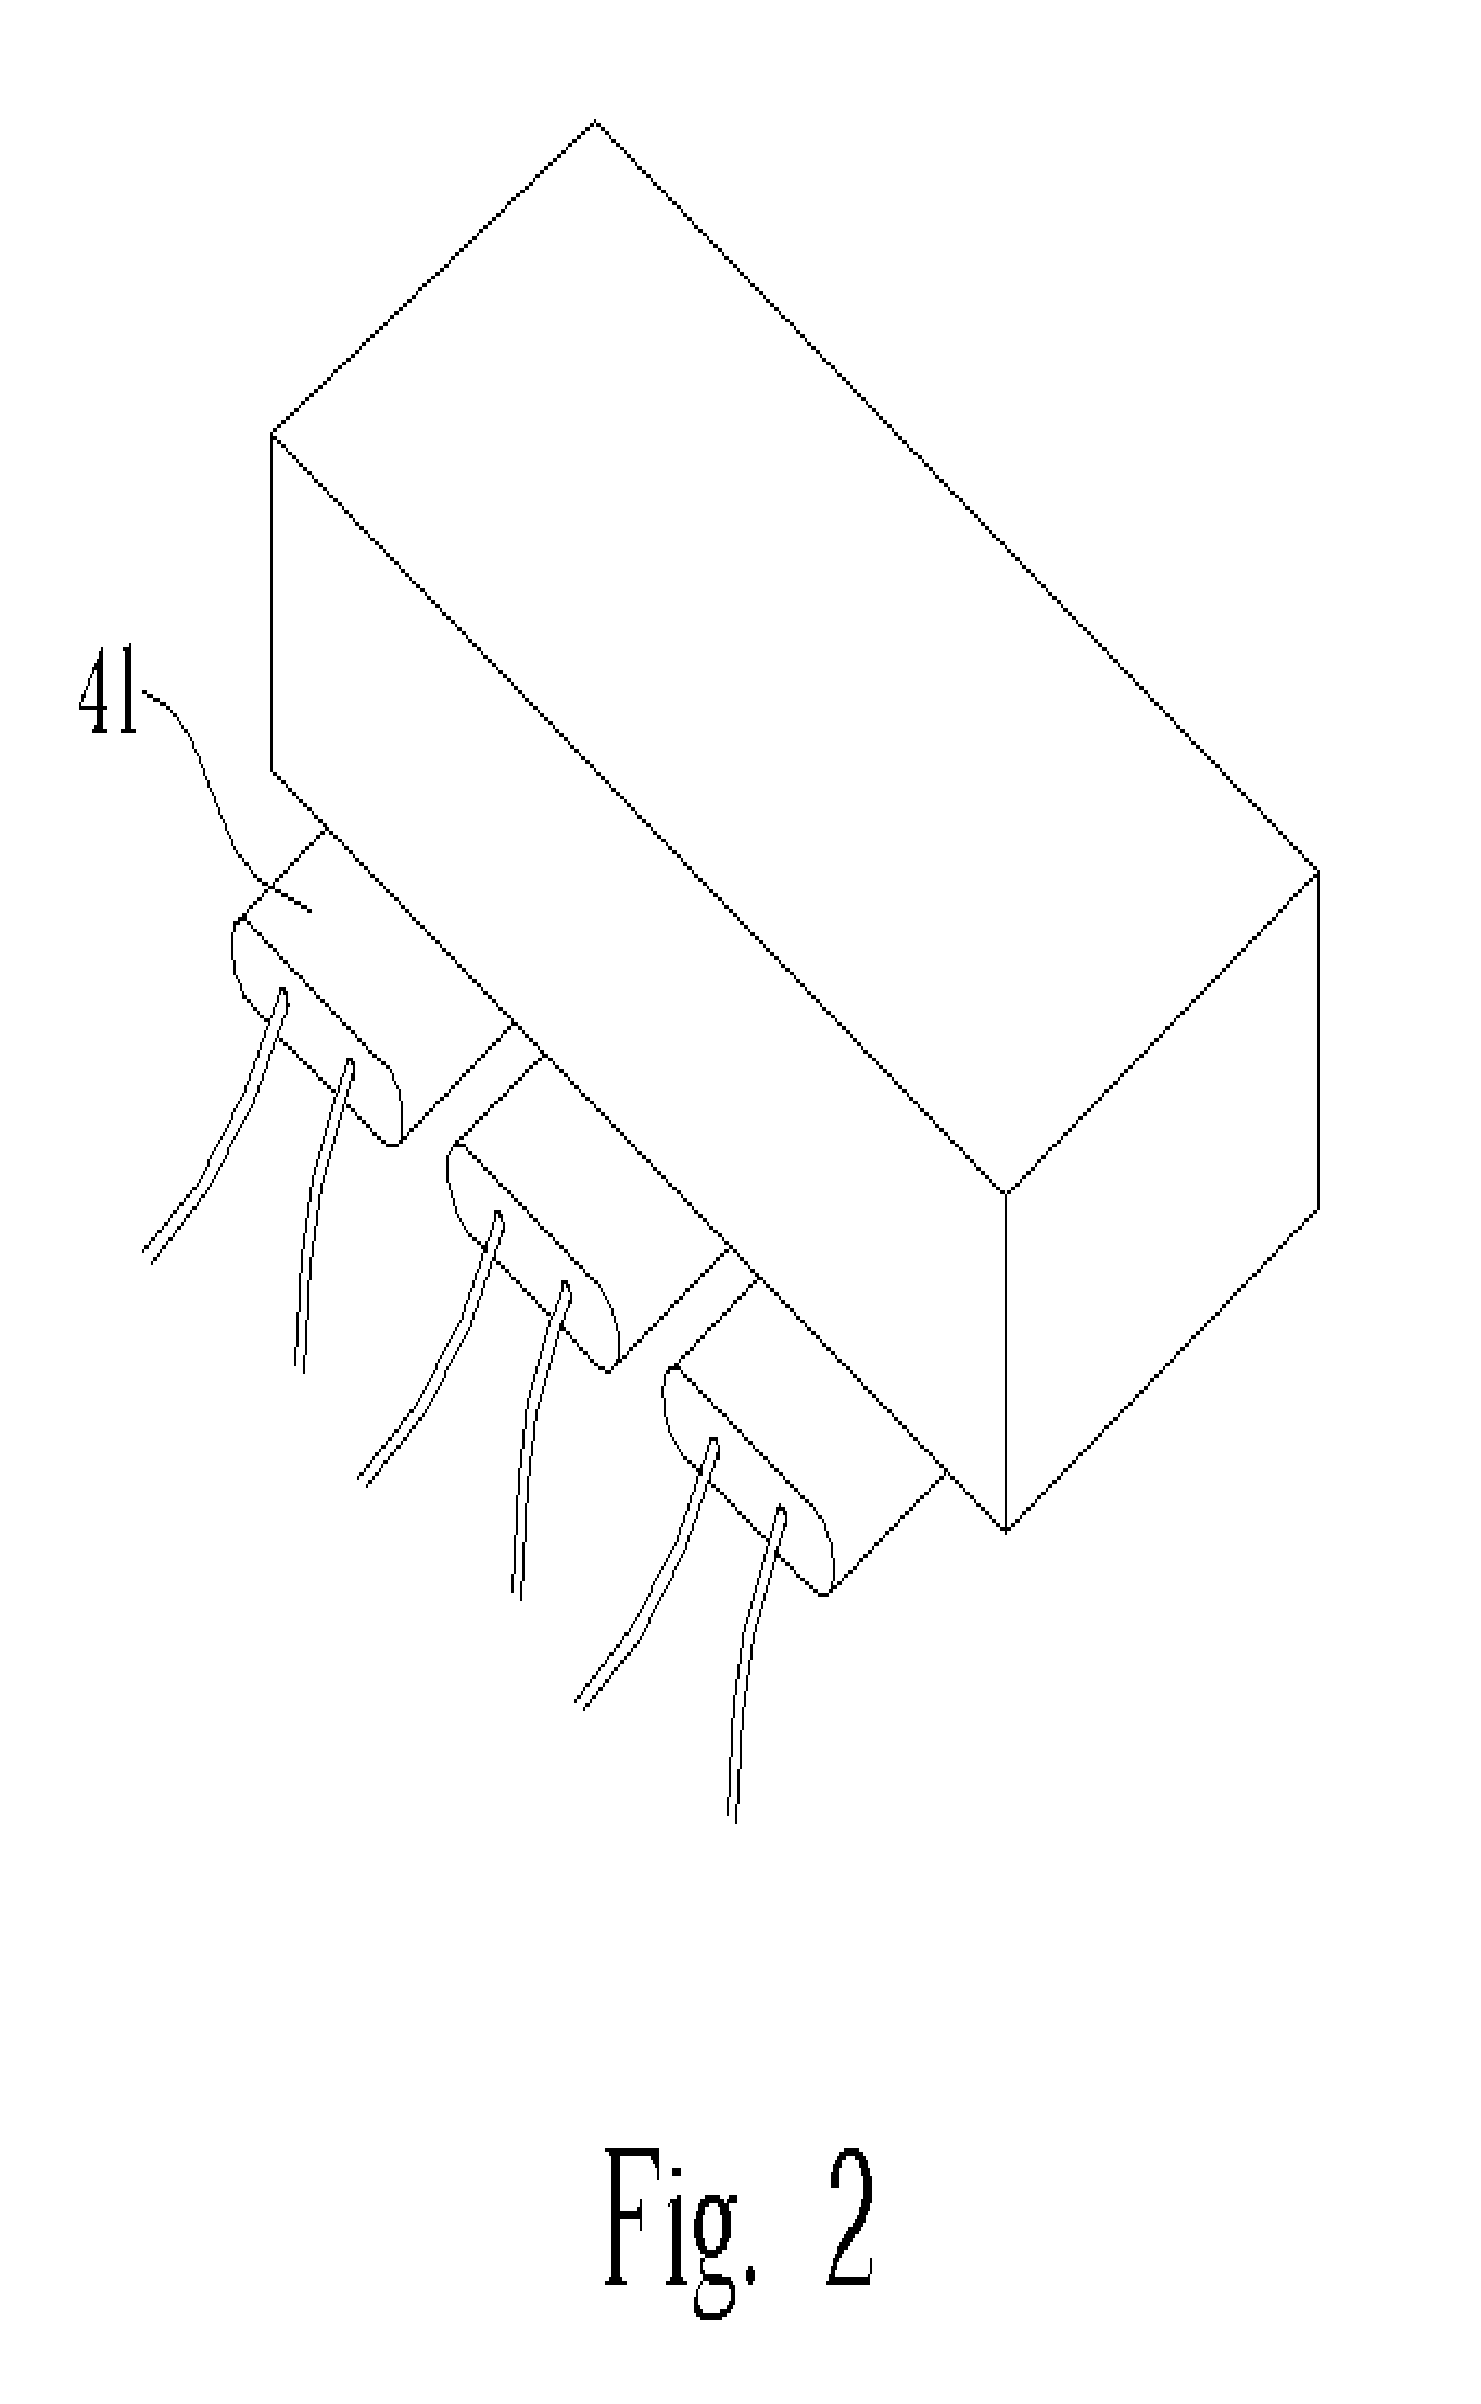 Micro-heating apparatus for locally controlling the temperature in a mold